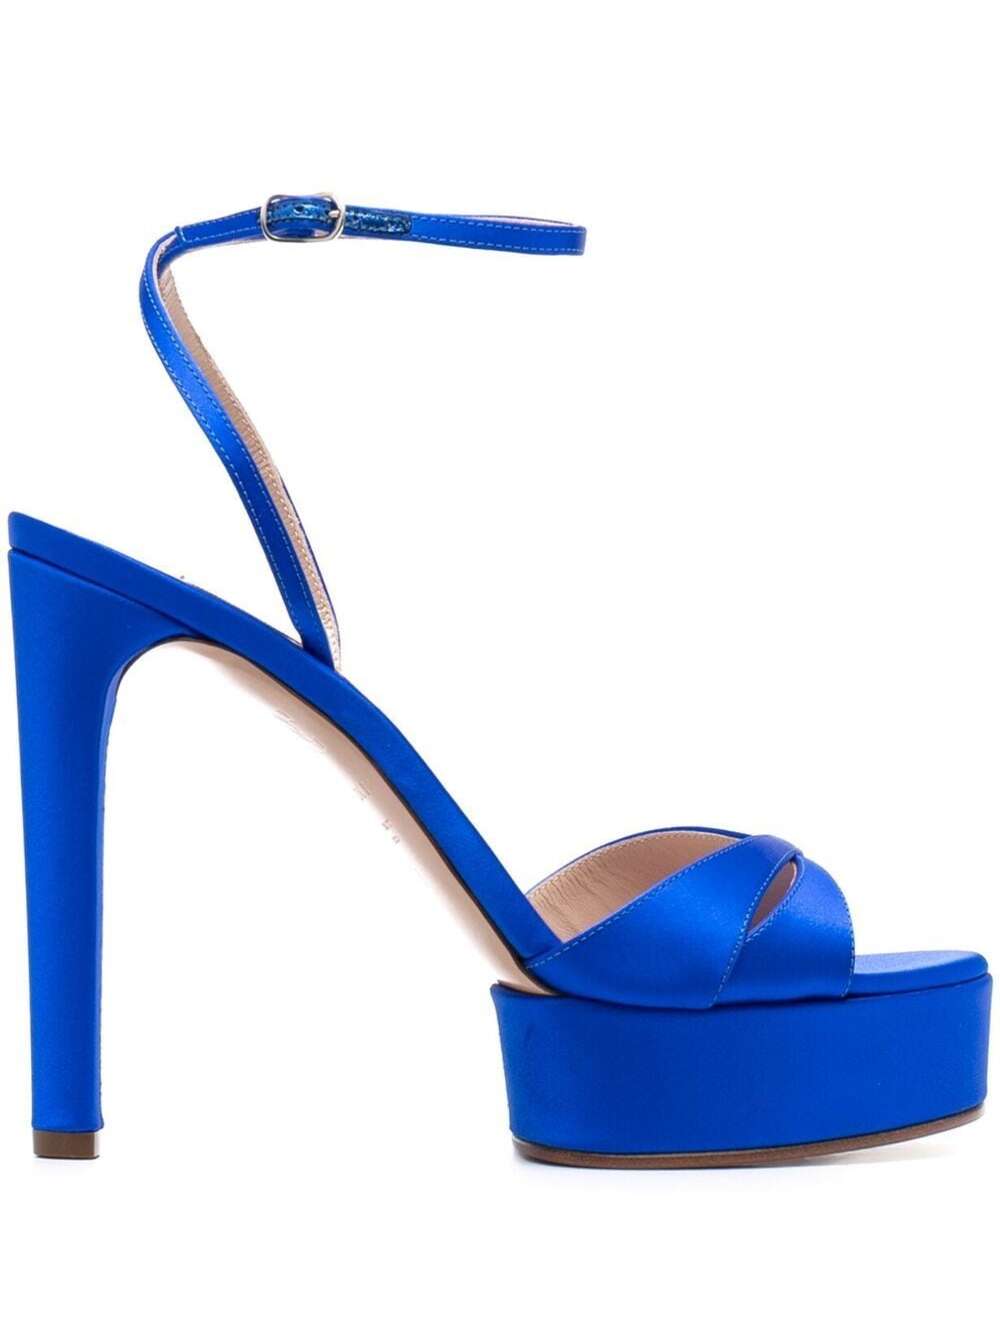 CASADEI OPHELIA ELETRIC BLUE SANDALS WITH PLATFORM WOMAN IN SATIN CASADEI